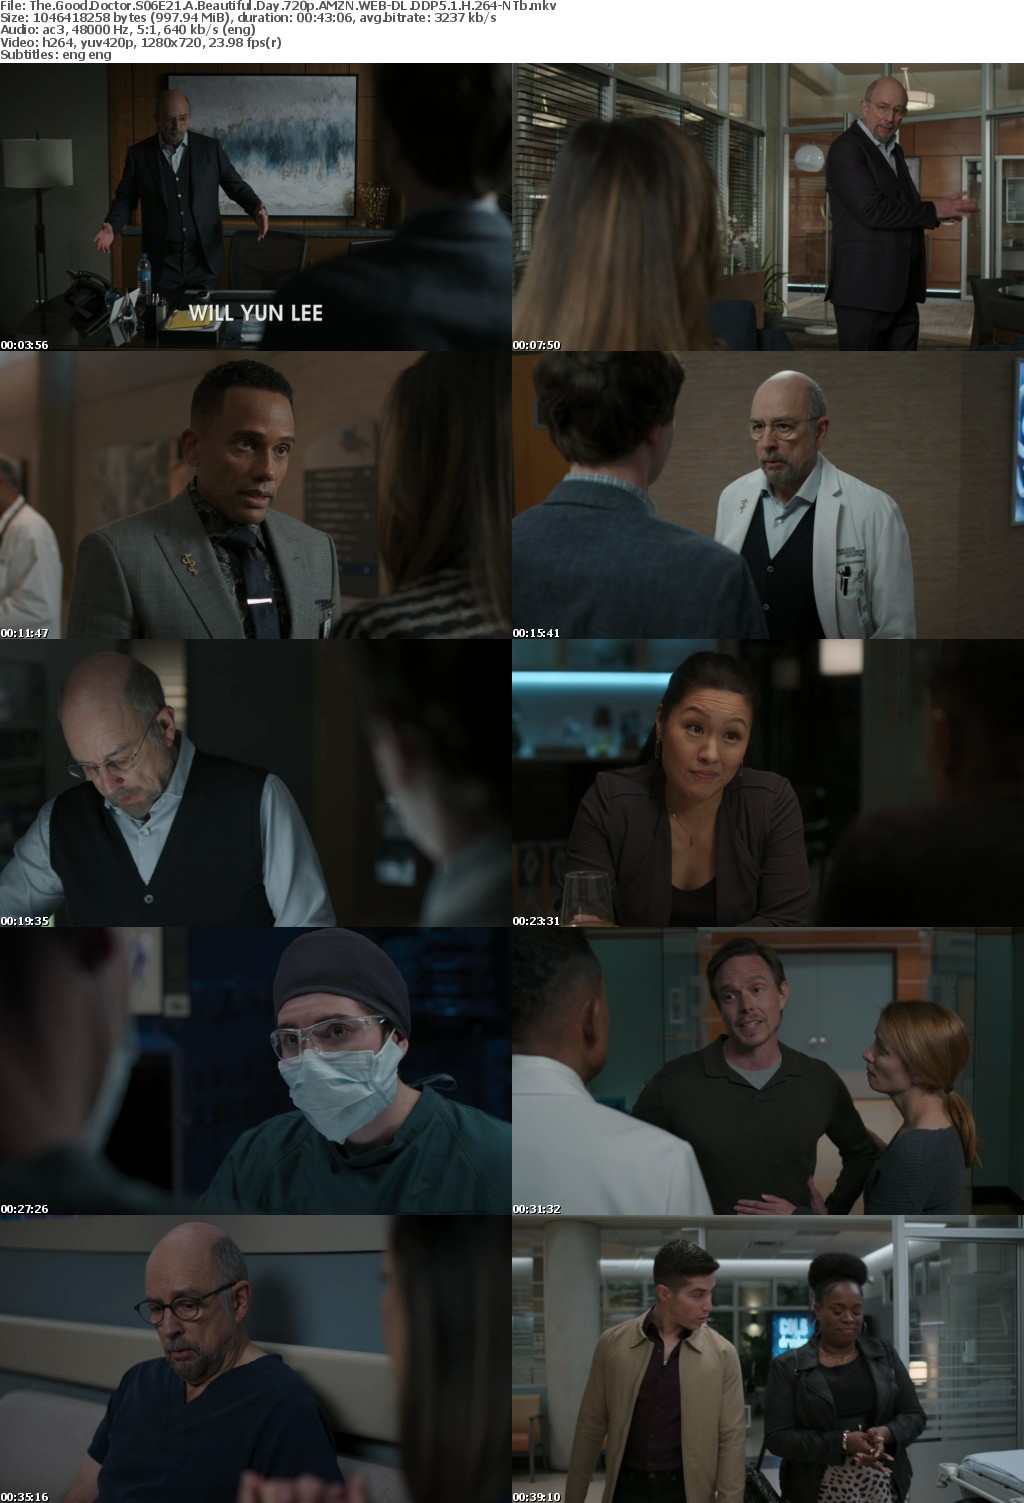 The Good Doctor S06E21 A Beautiful Day 720p AMZN WEBRip DDP5 1 x264-NTb